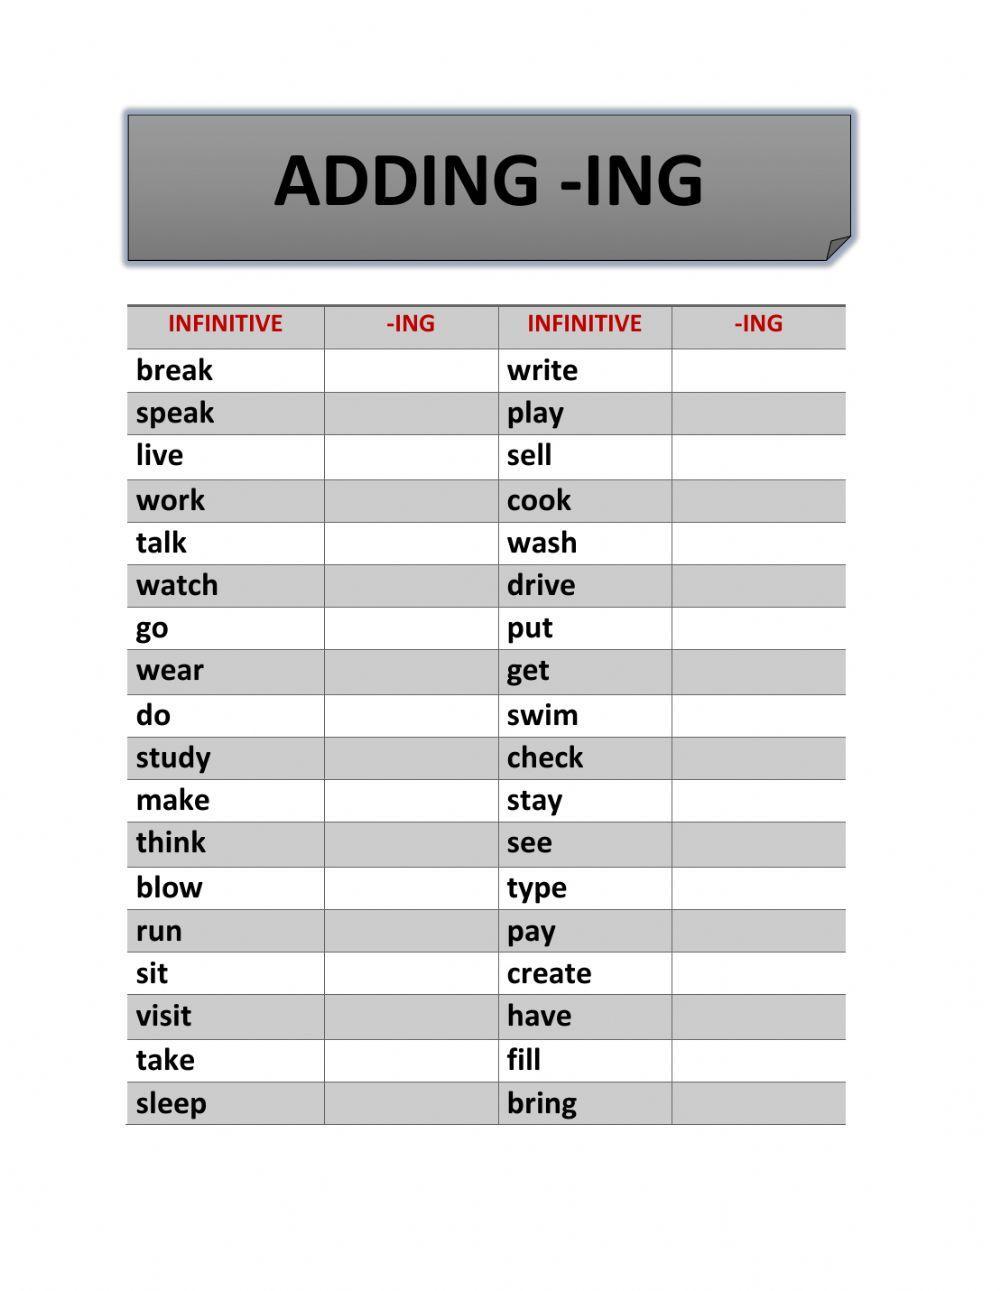 Adding -ing to the verbs